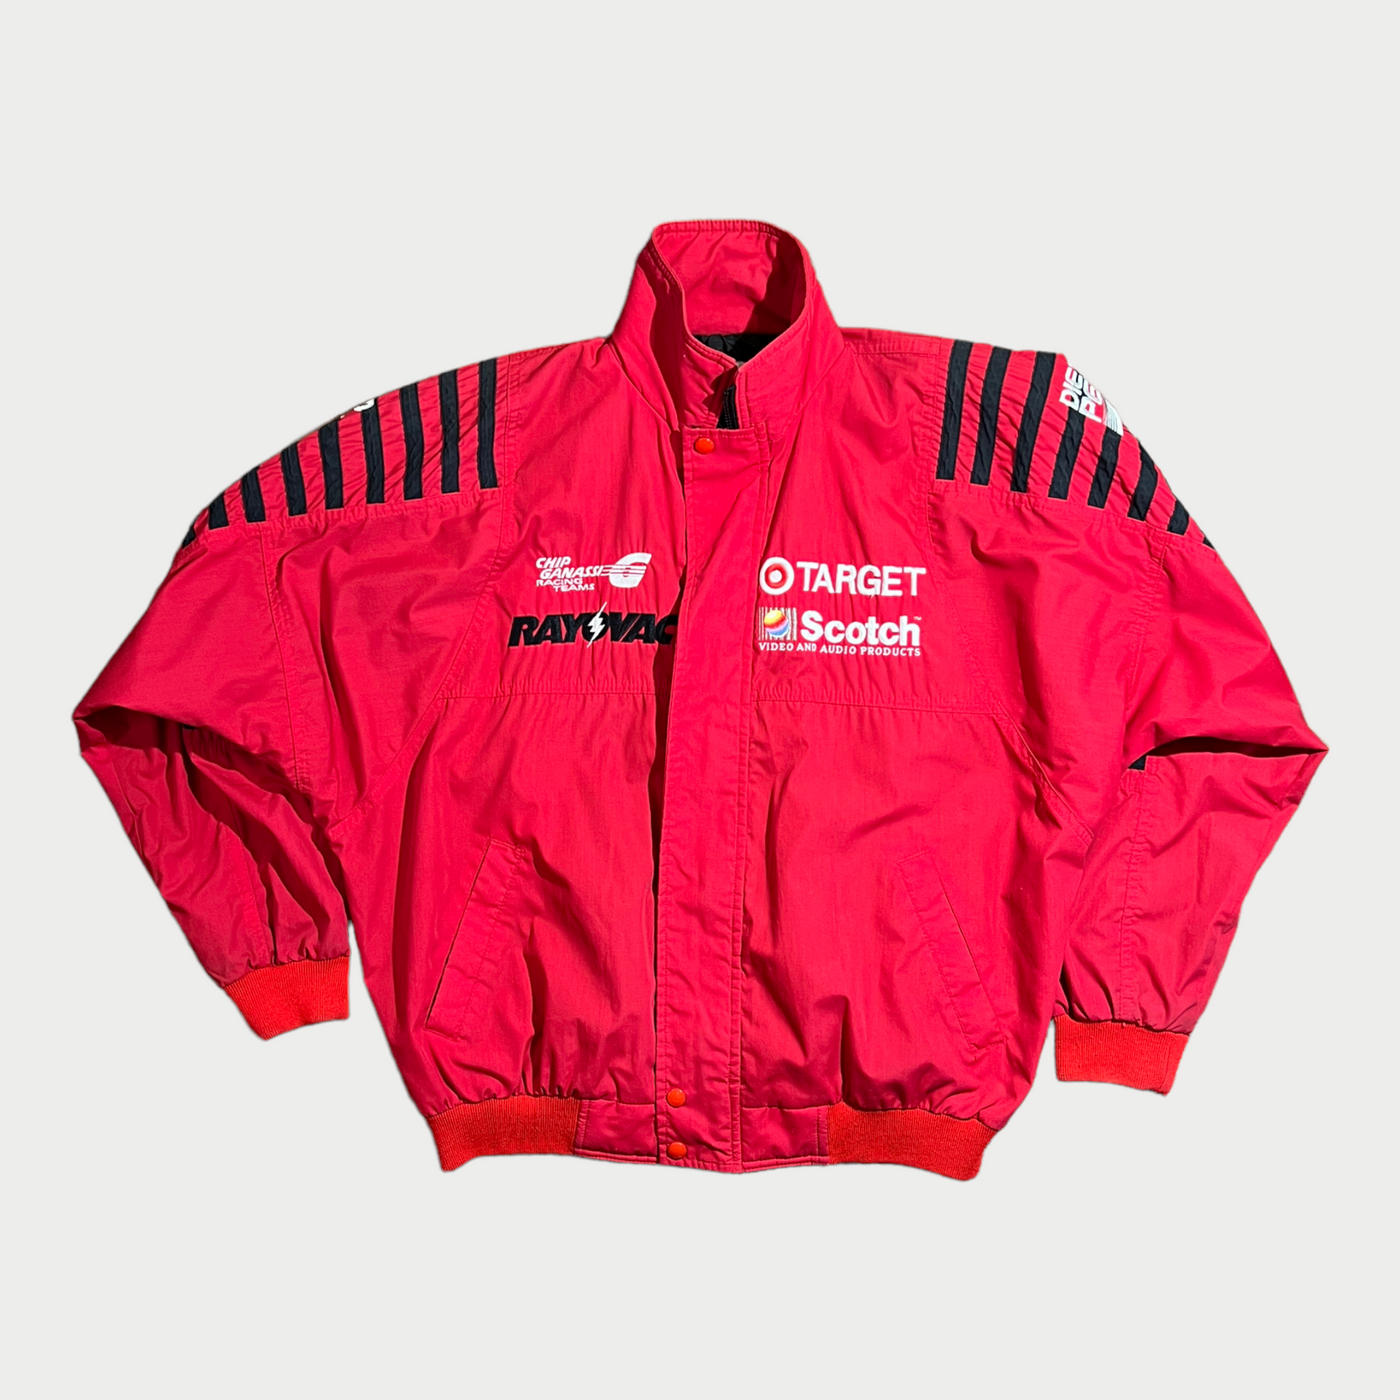 Racing Jacket With Embroidery And Patches Front